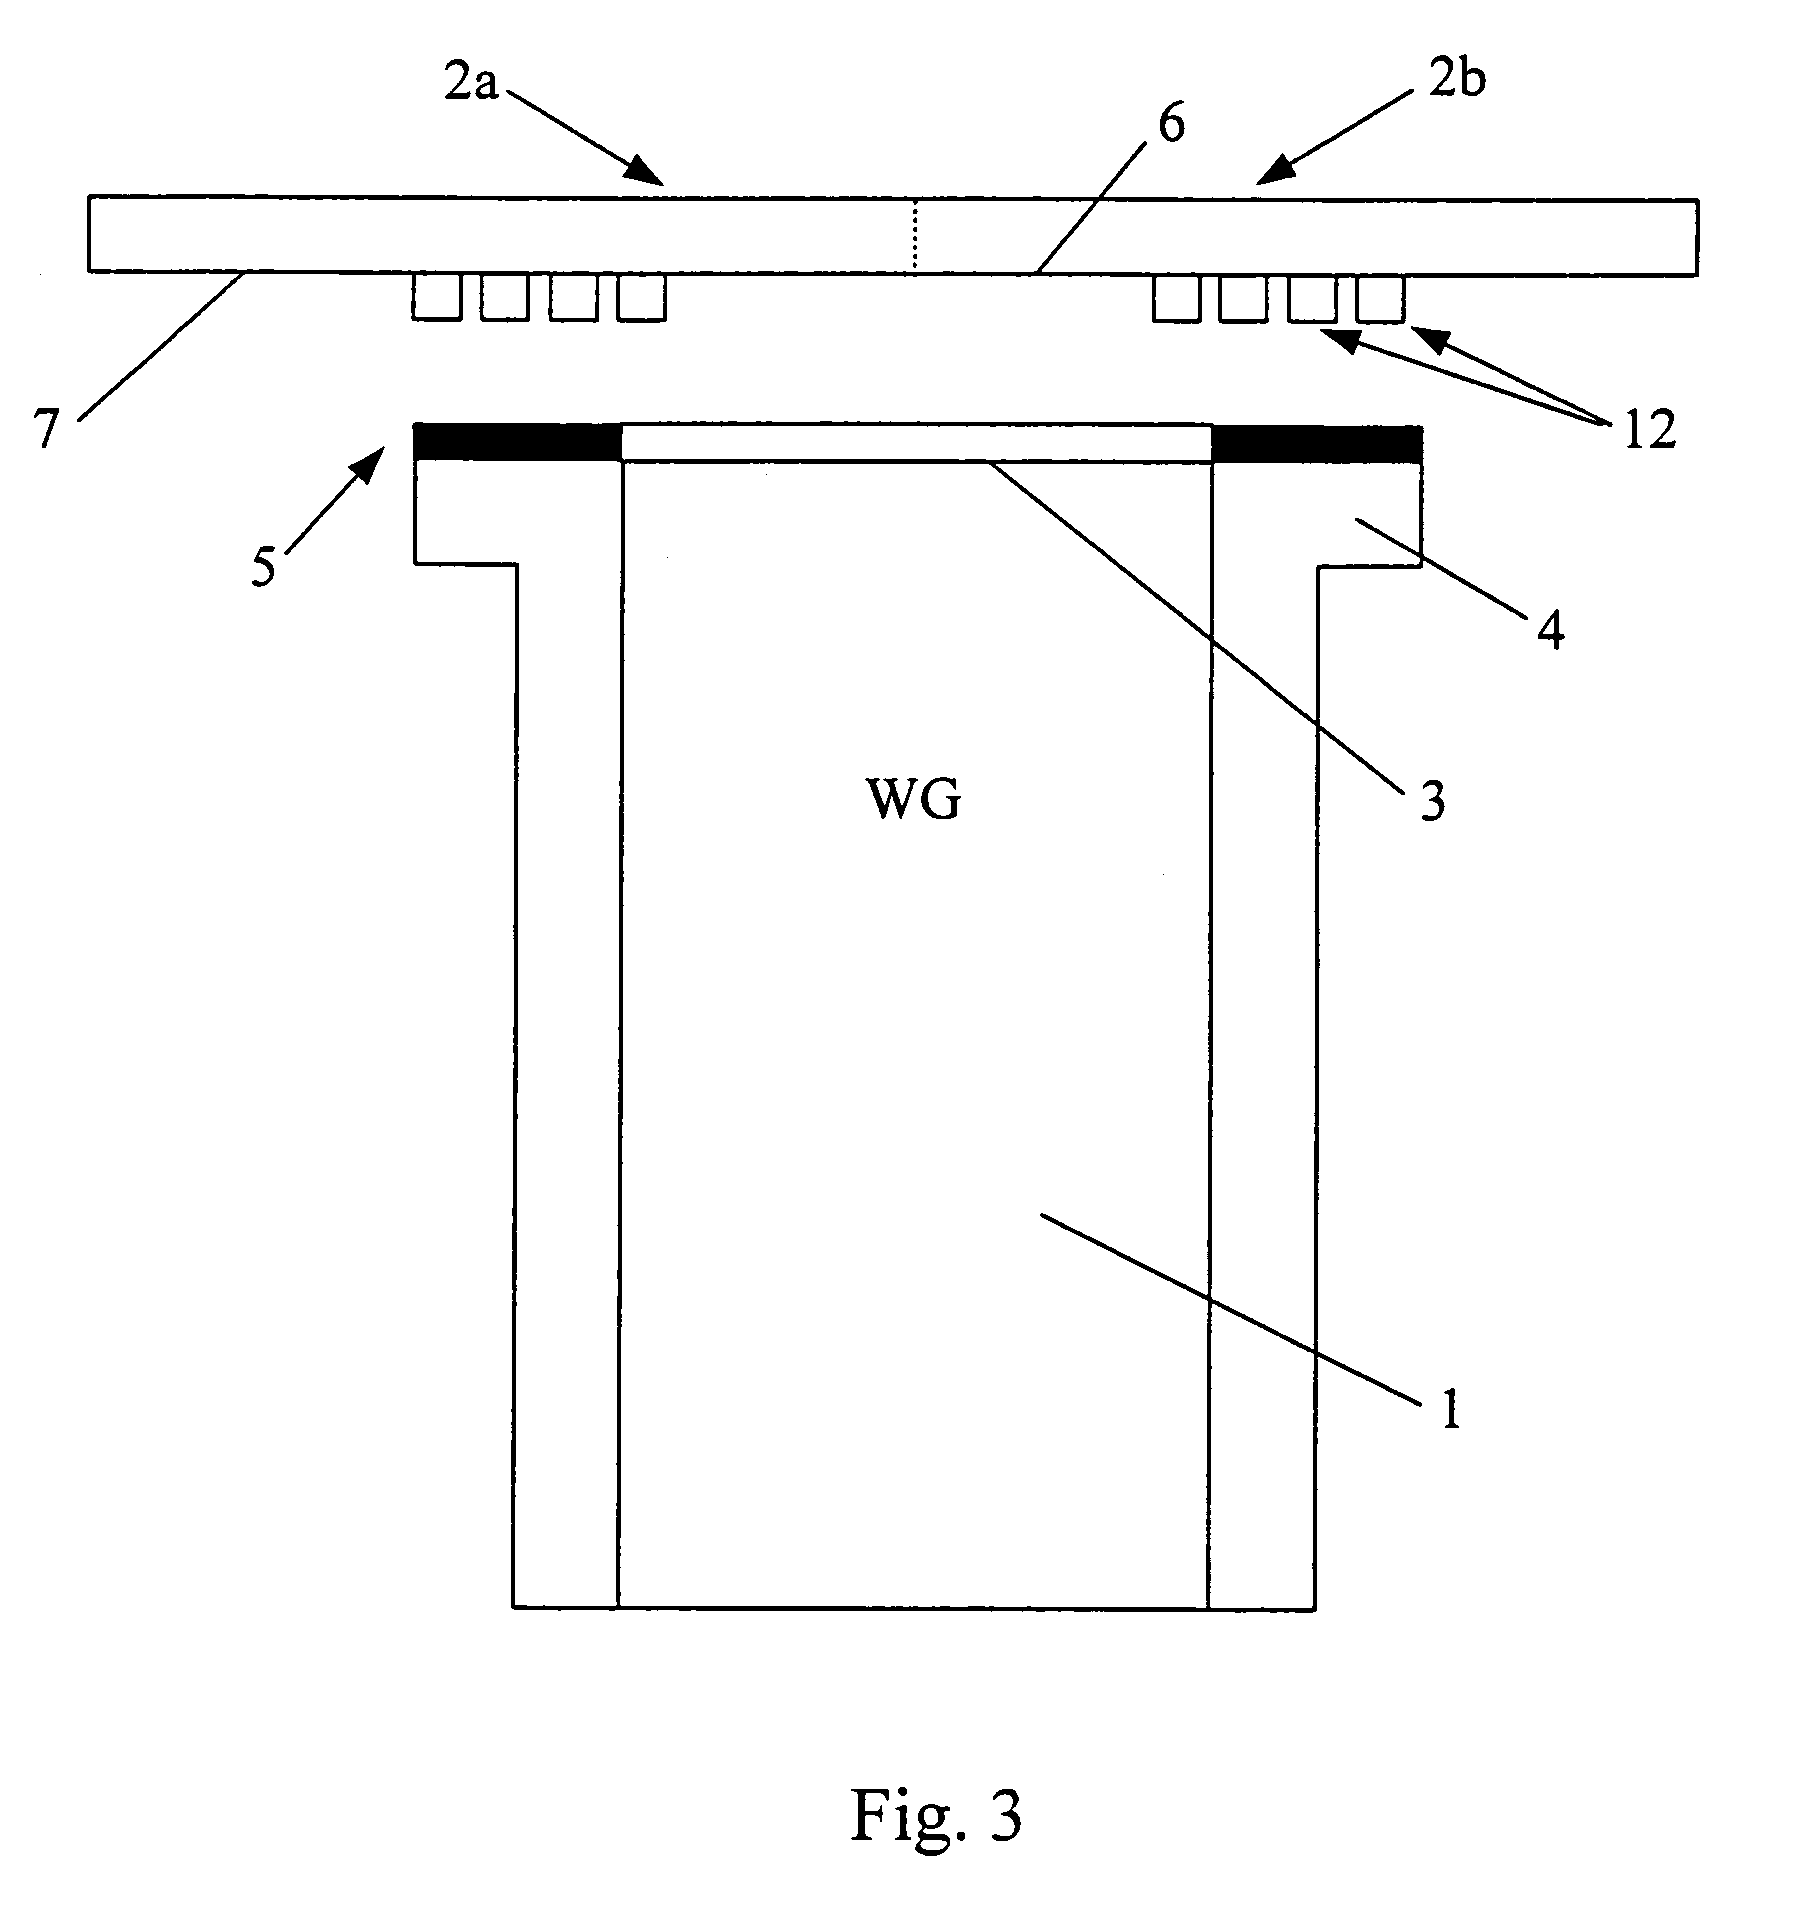 Self-aligned transition between a transmission line and a module